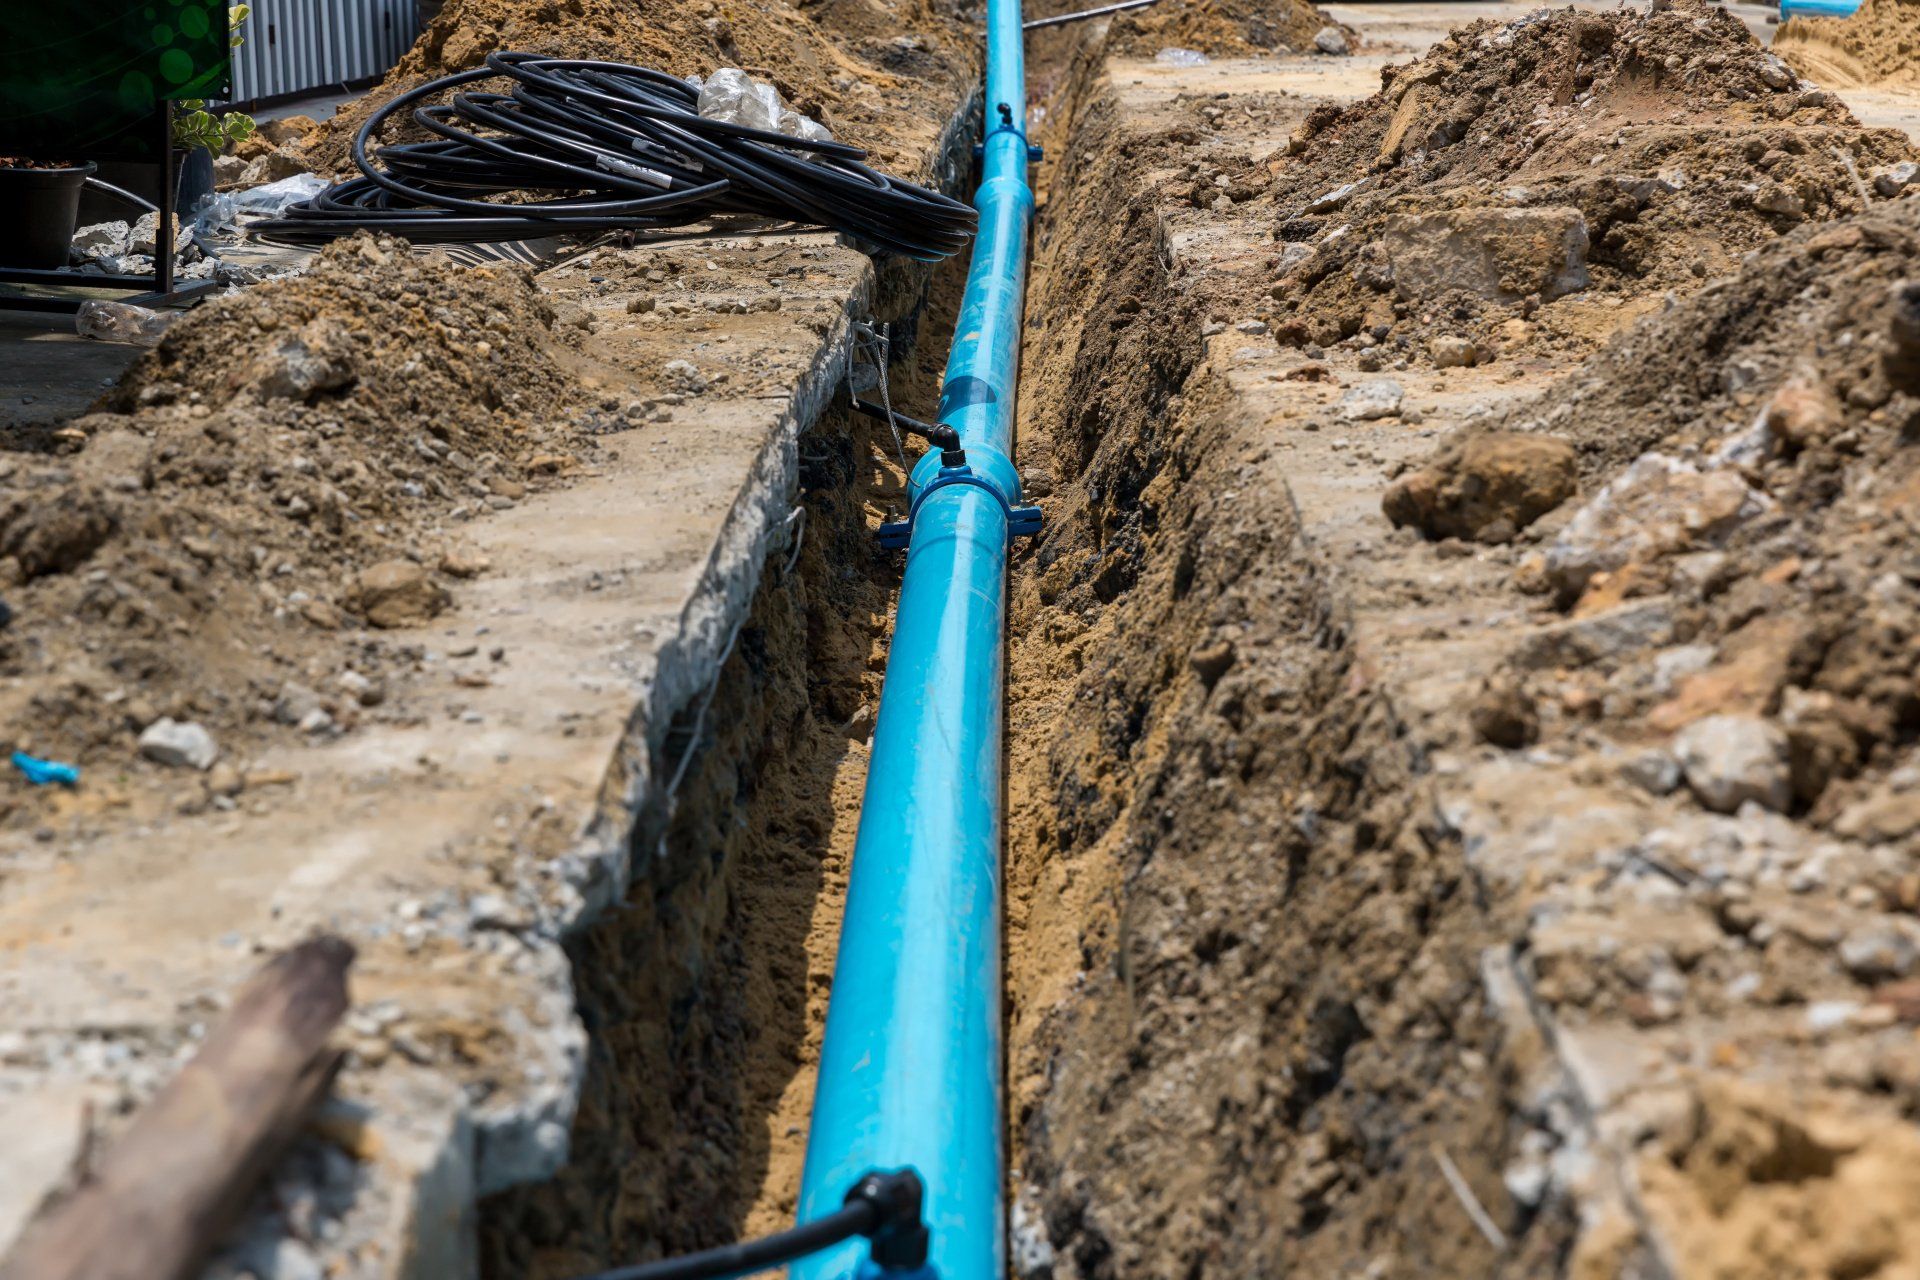 Construction site in a city with new water pipes being installed in the ground.